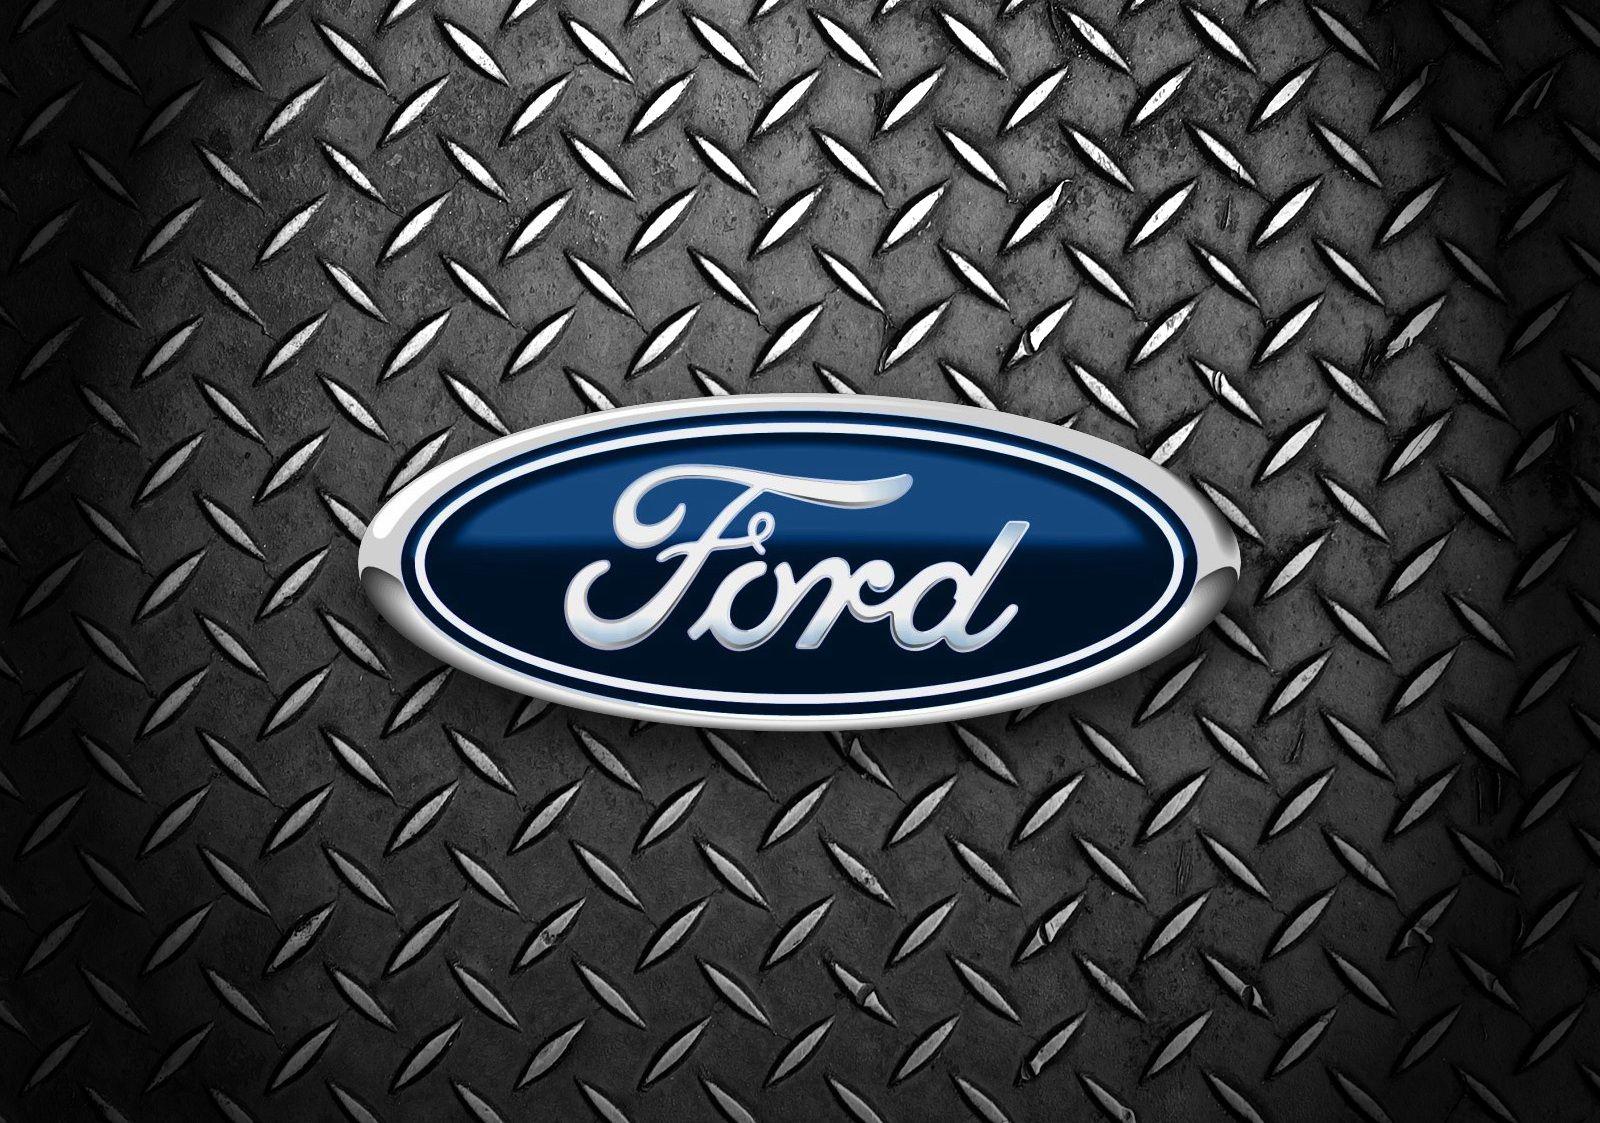 Blue Oval Car Logo - Ford Logo, Ford Car Symbol Meaning and History | Car Brand Names.com